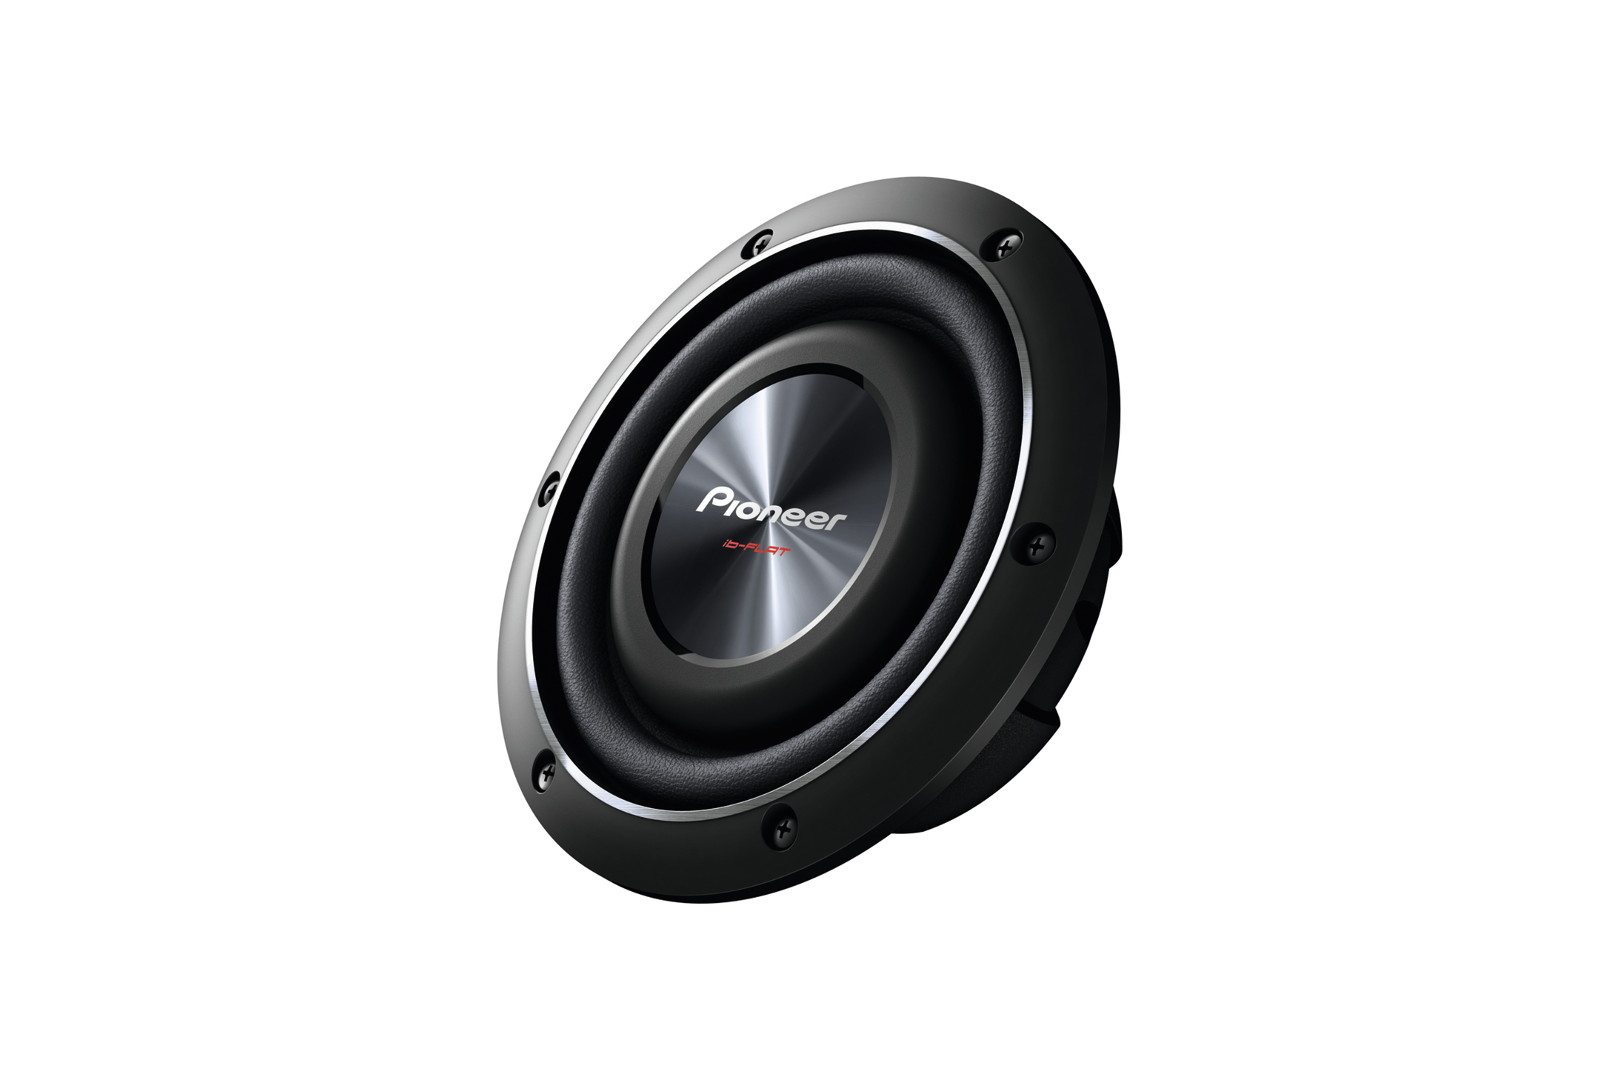 Pioneer TS-SW2002D2 Subwoofer